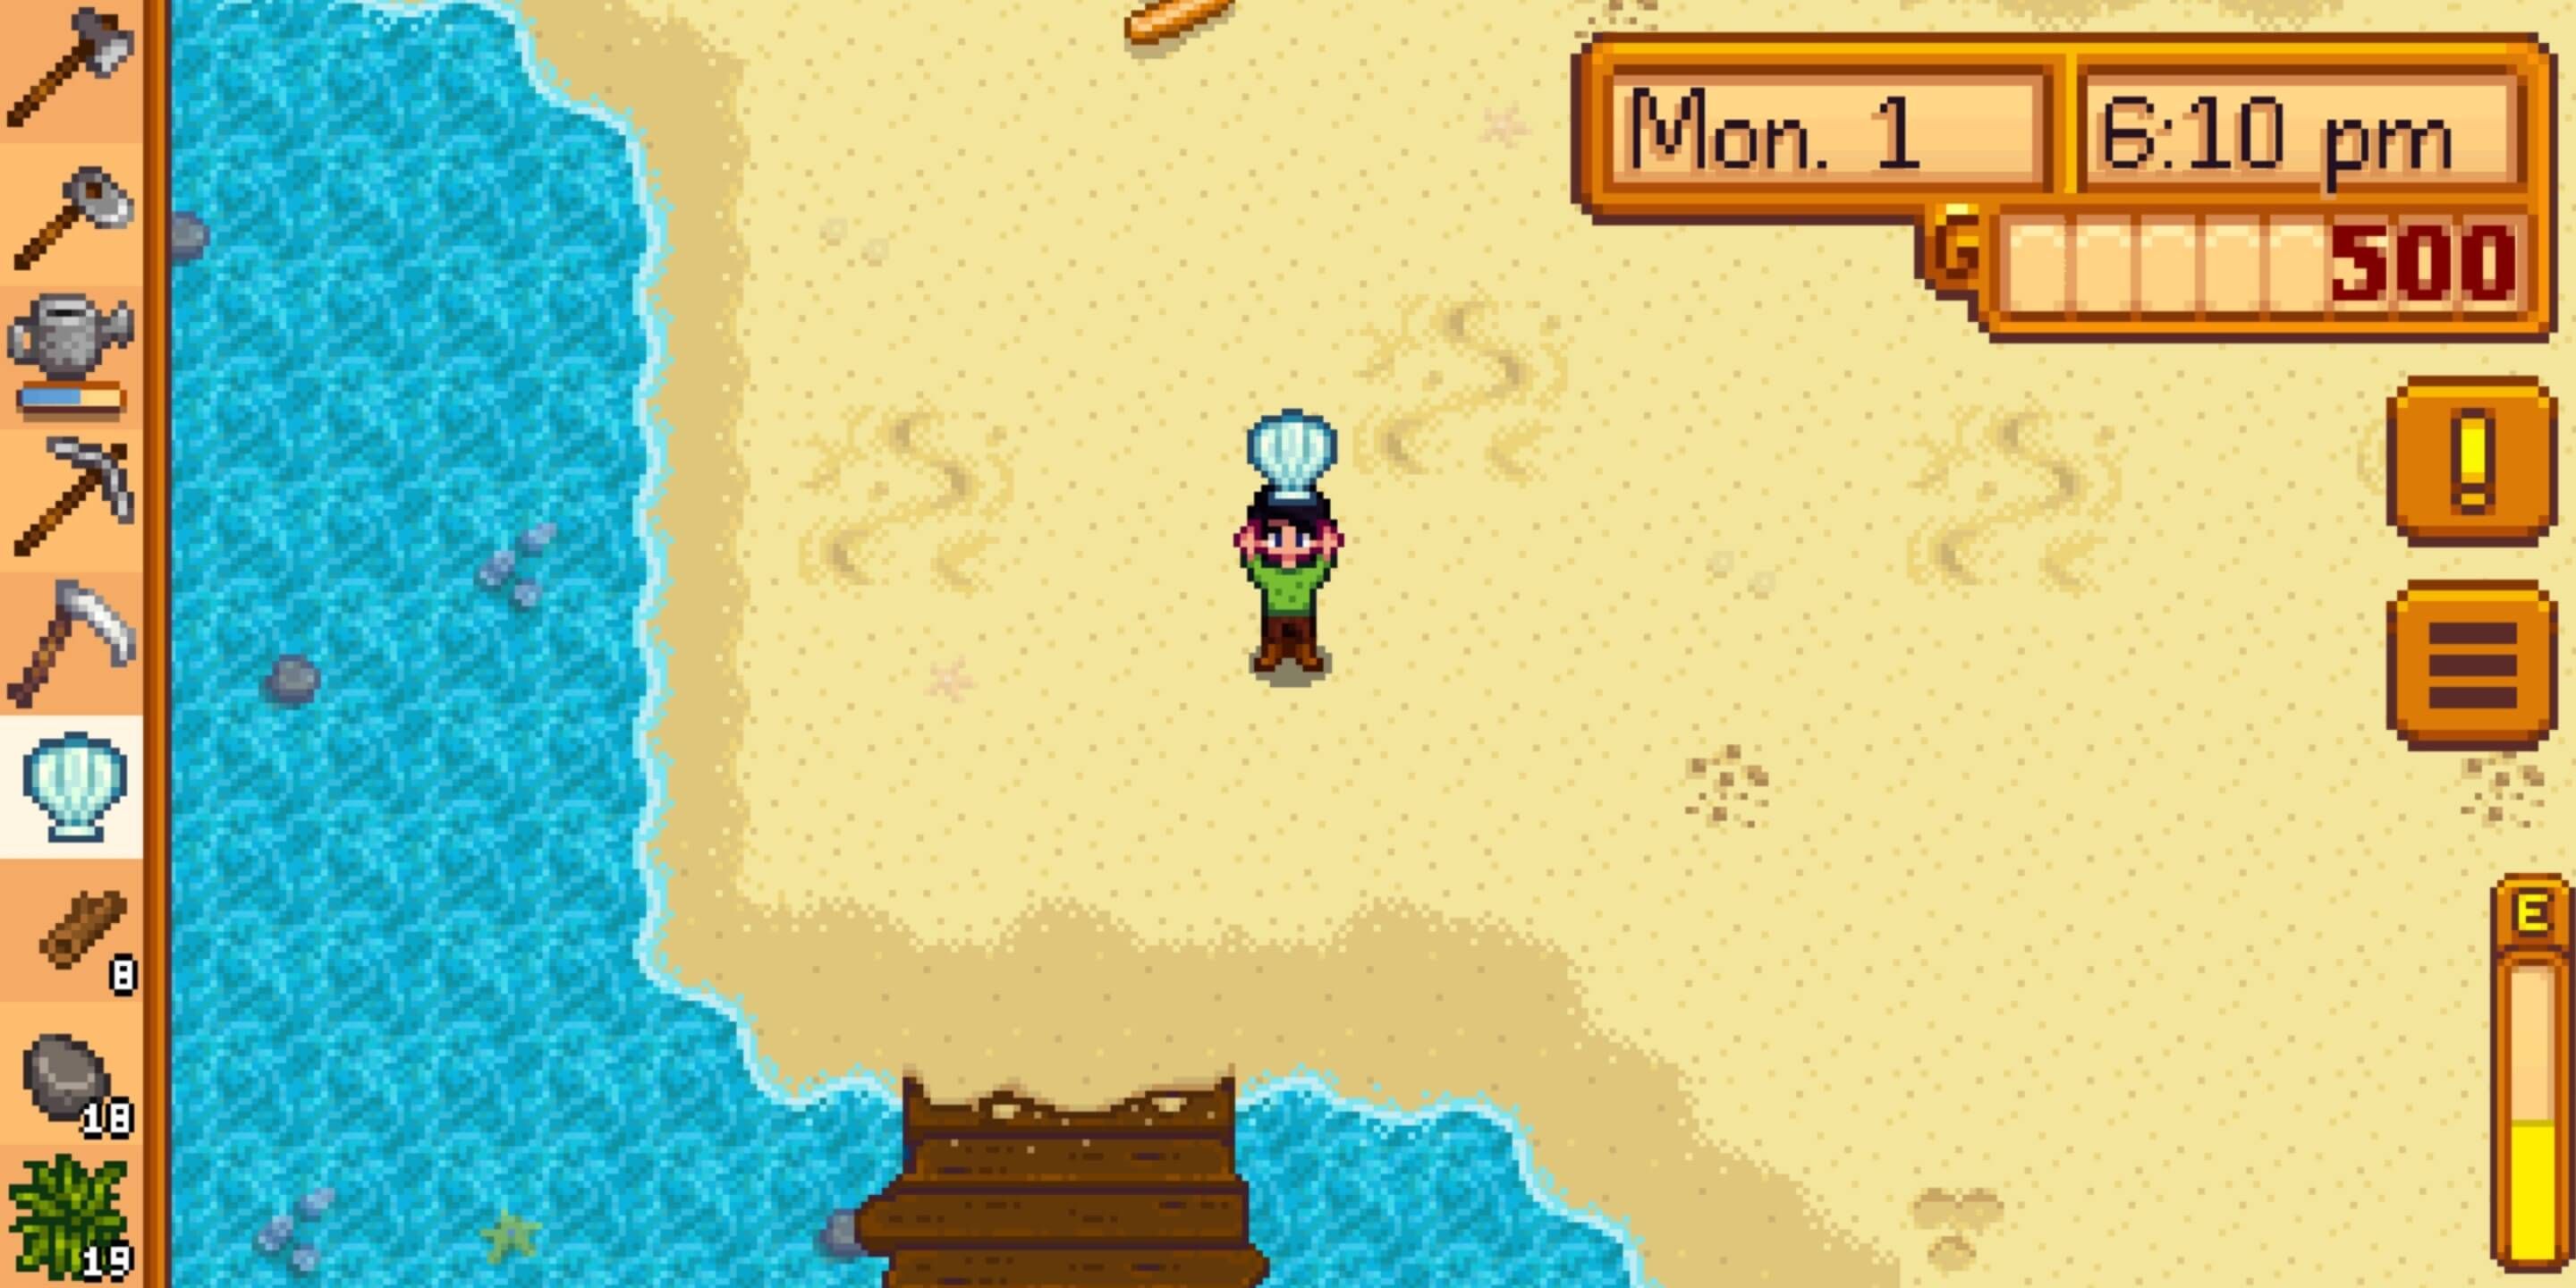 Stardew Valley I found a shell near water on the beach